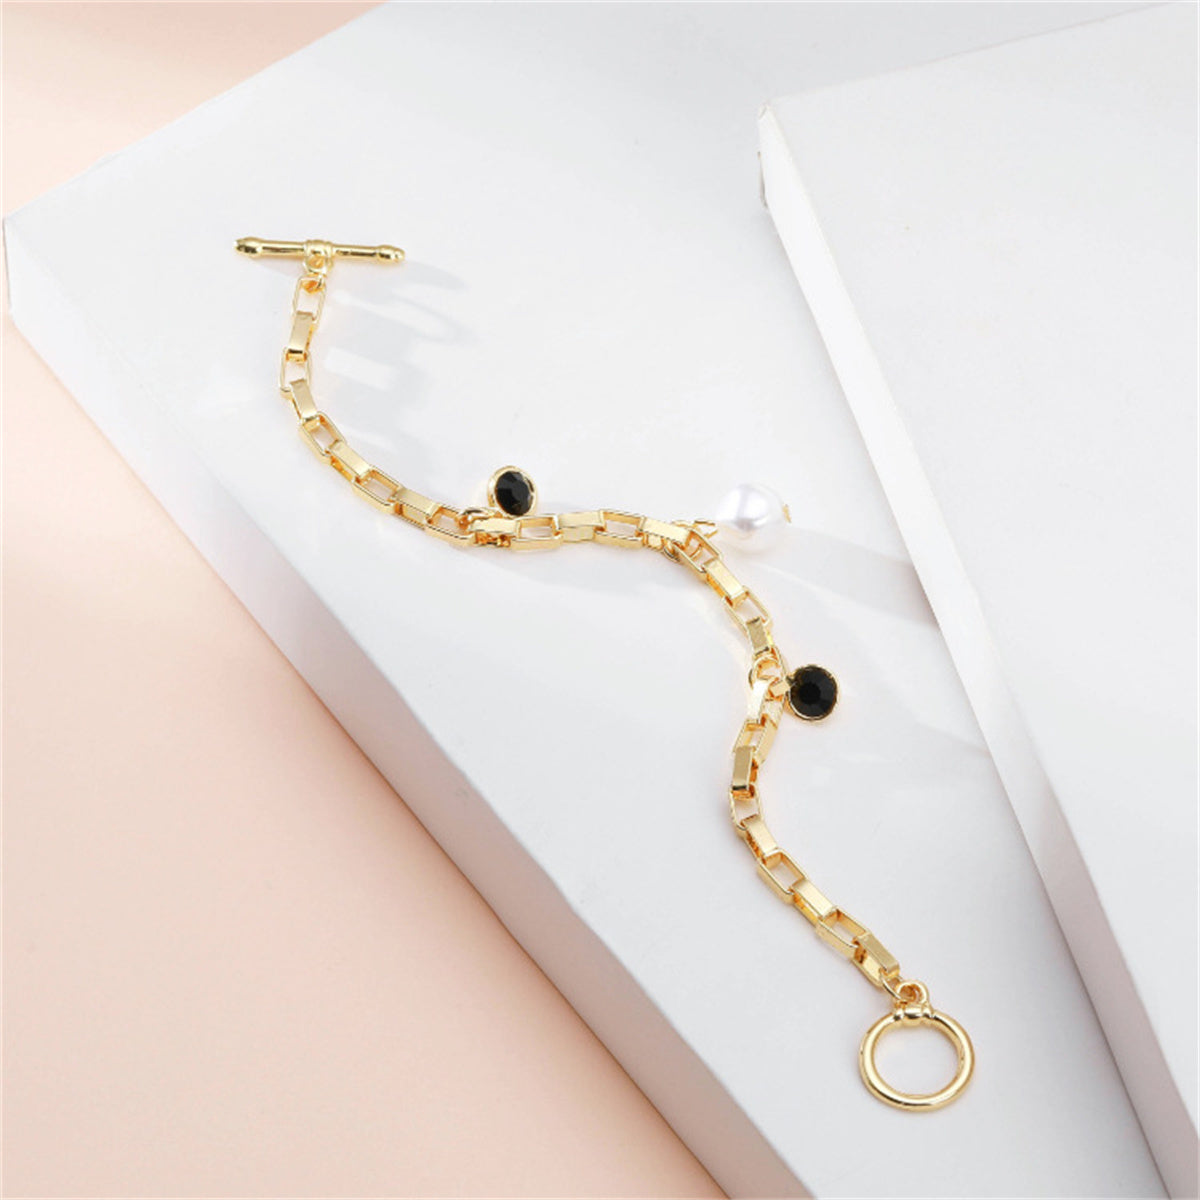 Pearl & Cubic Zirconia 18K Gold-Plated Charm Bracelet